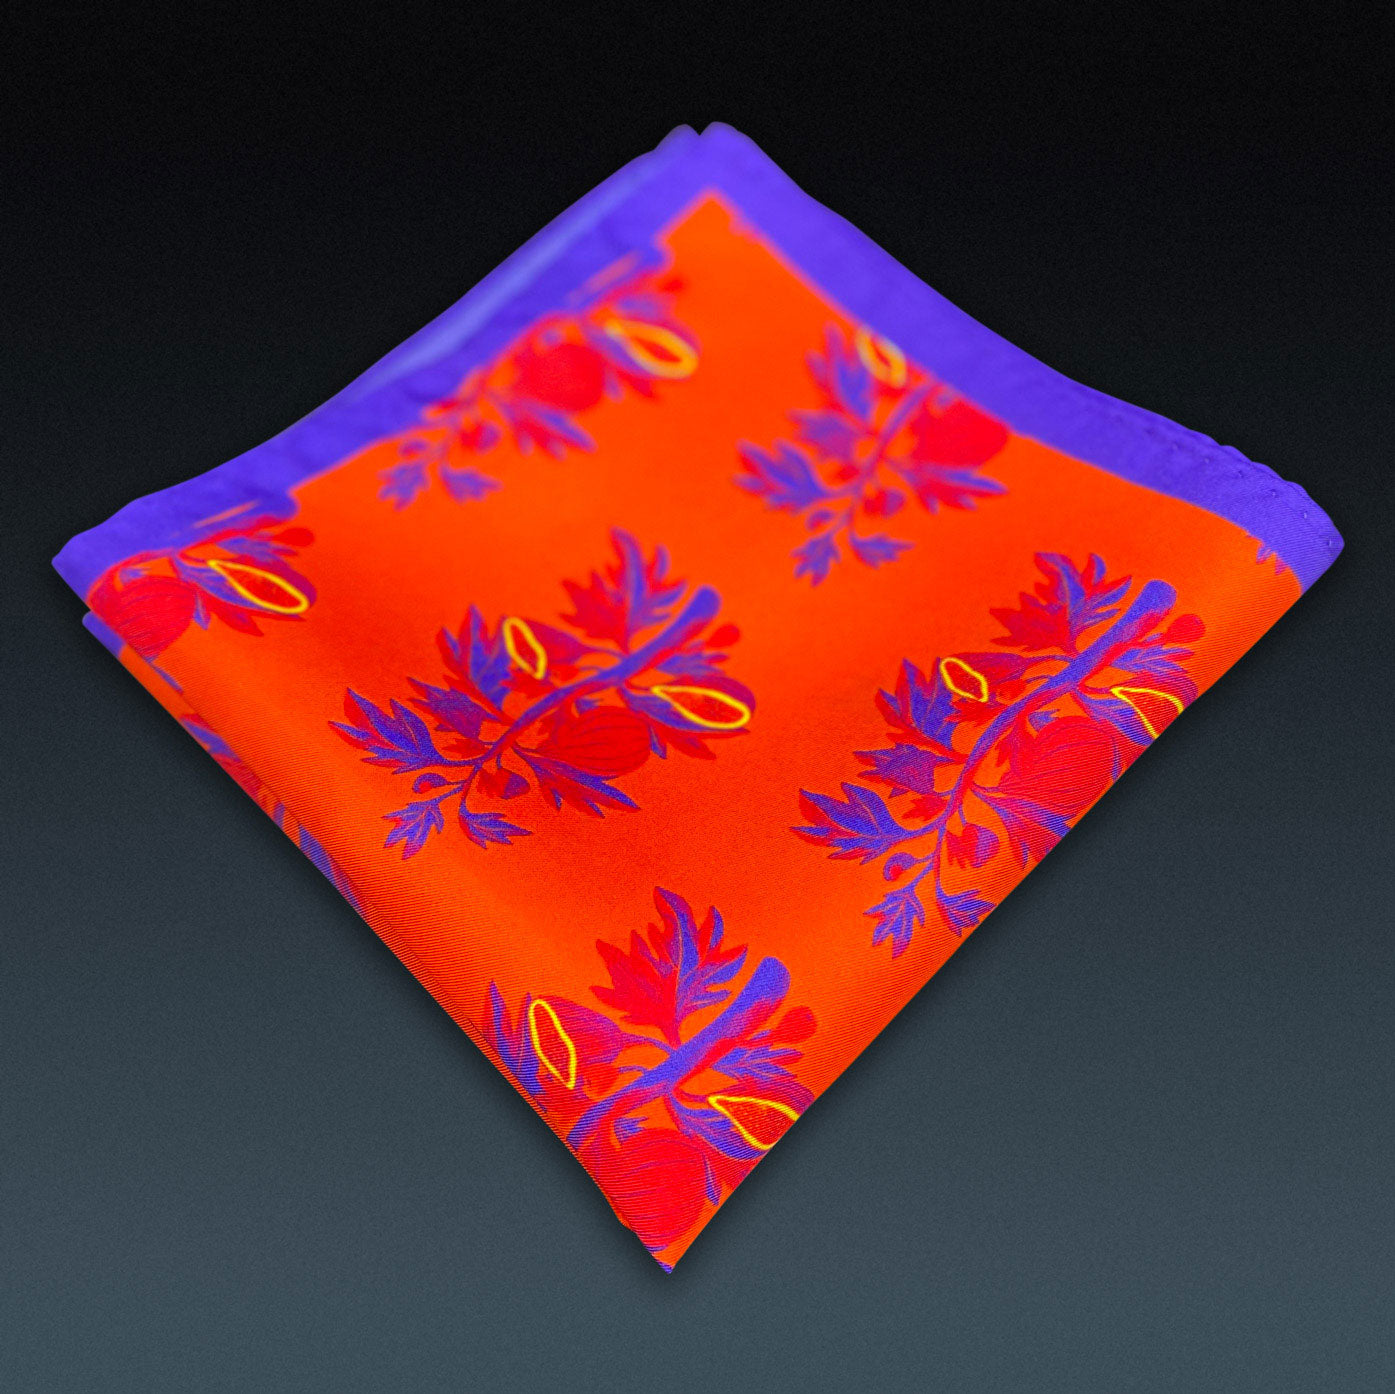 Folded 'Severn' silk pocket square from SOHO Scarves, showing the tree branch repeat motif. Placed on a dark background.